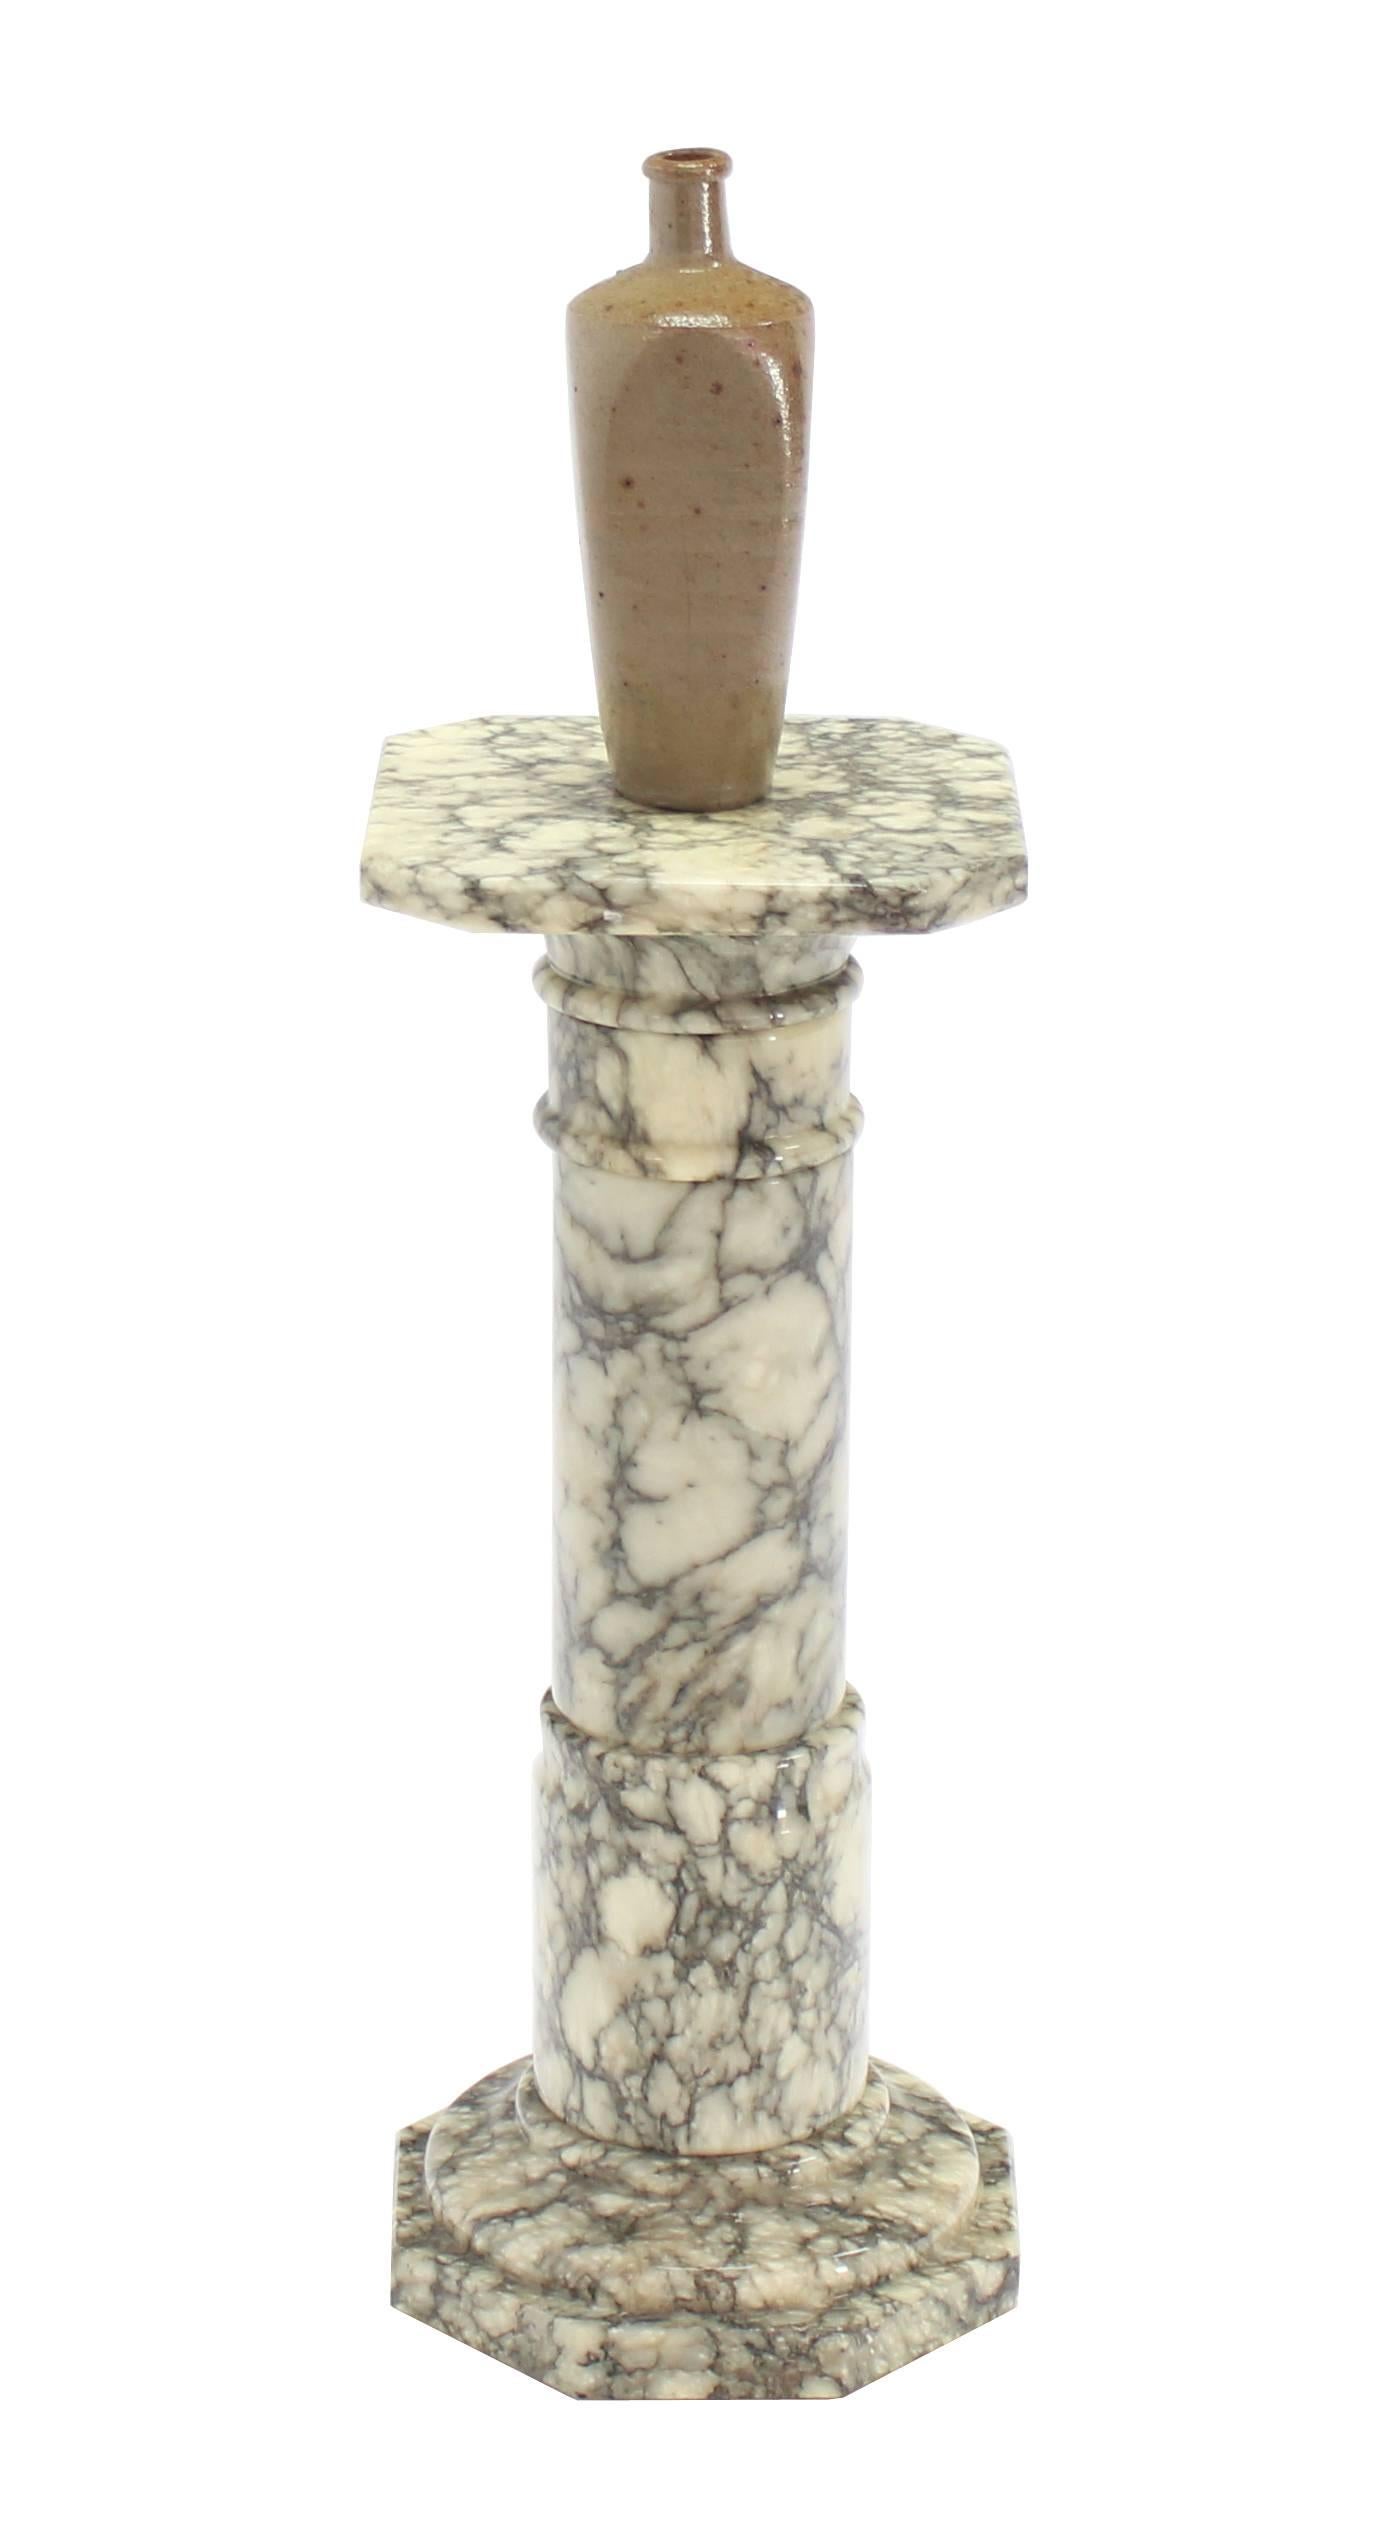 Very nice Mid-Century Modern style turned onyx pedestal stand.